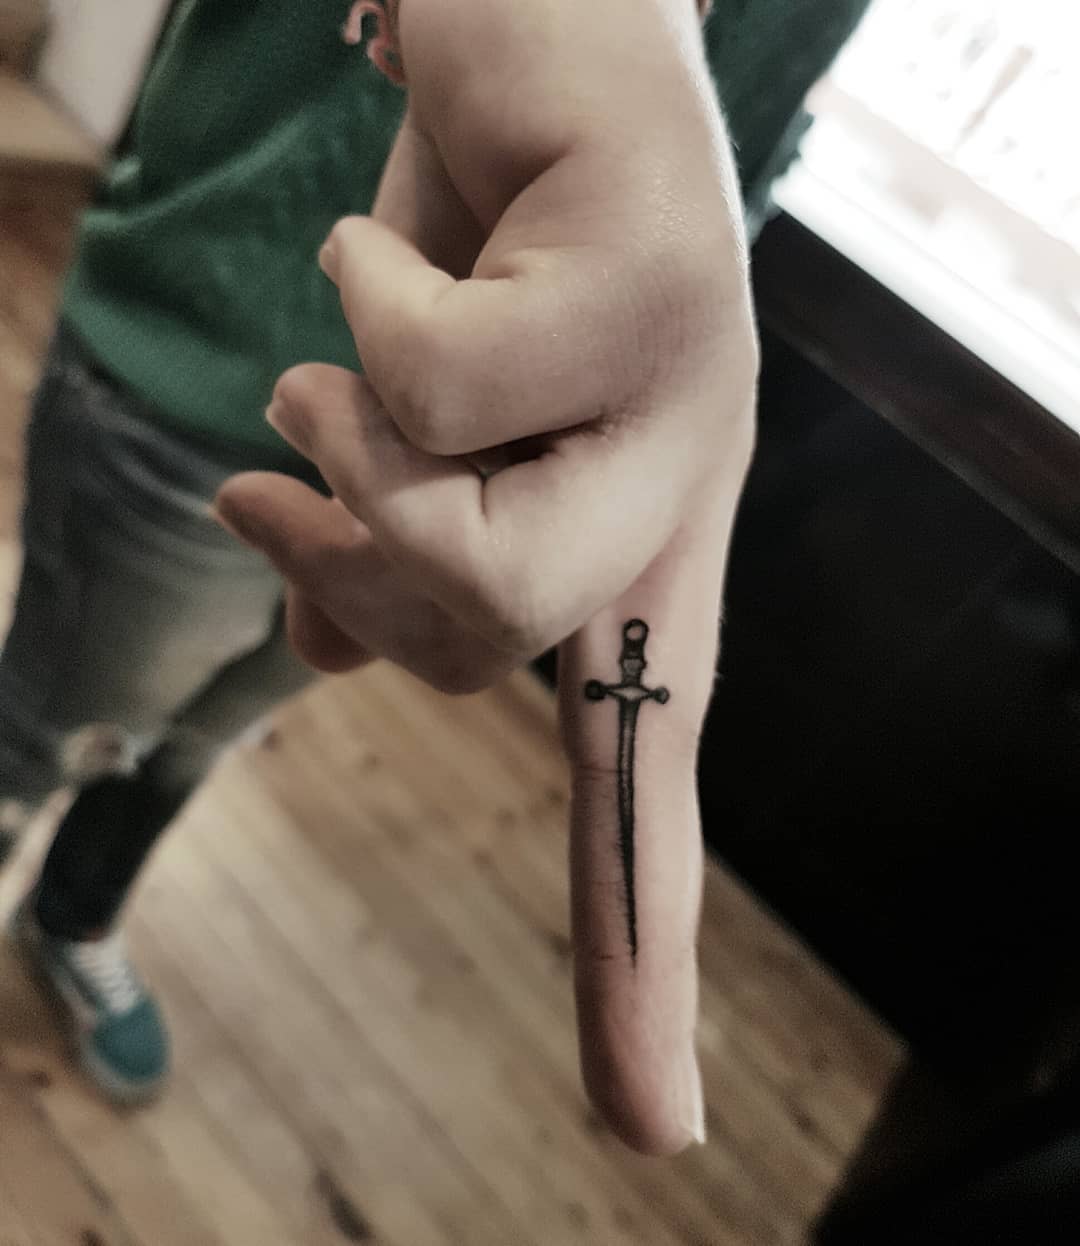 Having sword finger tattoos is a cool way to start out wearing tattoos.